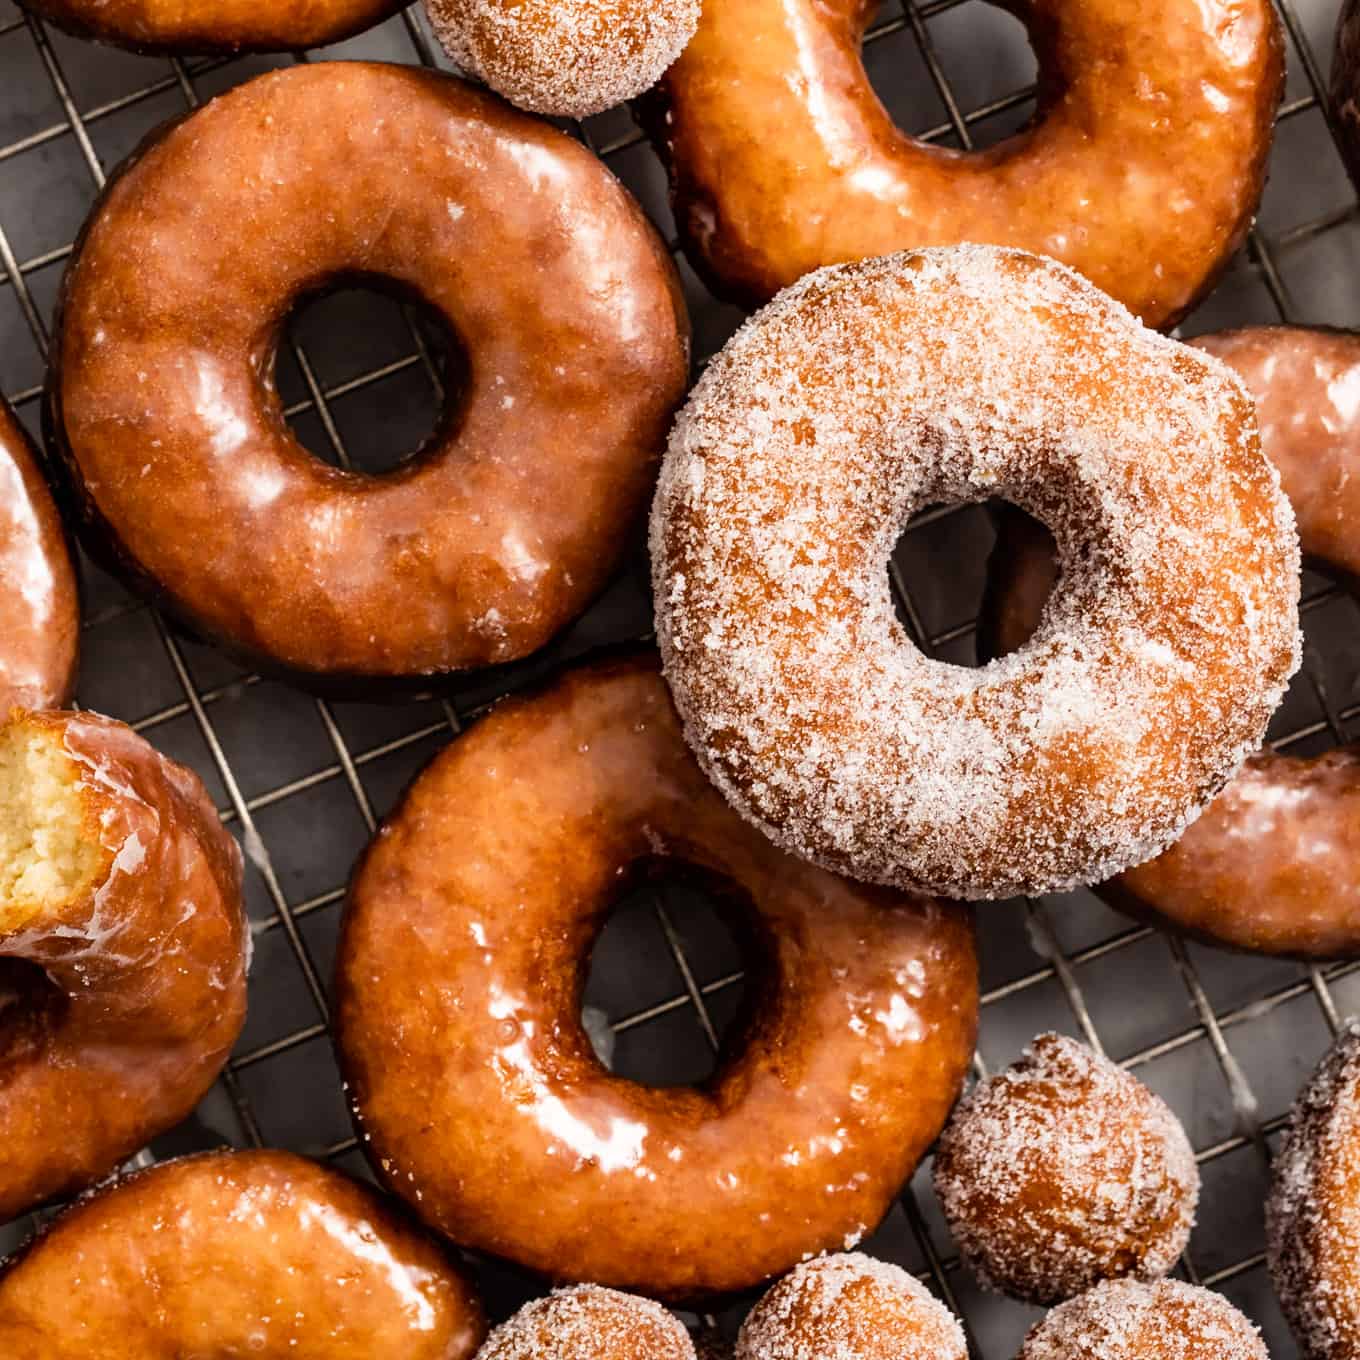 Homemade Gluten-Free Donuts with Yeast